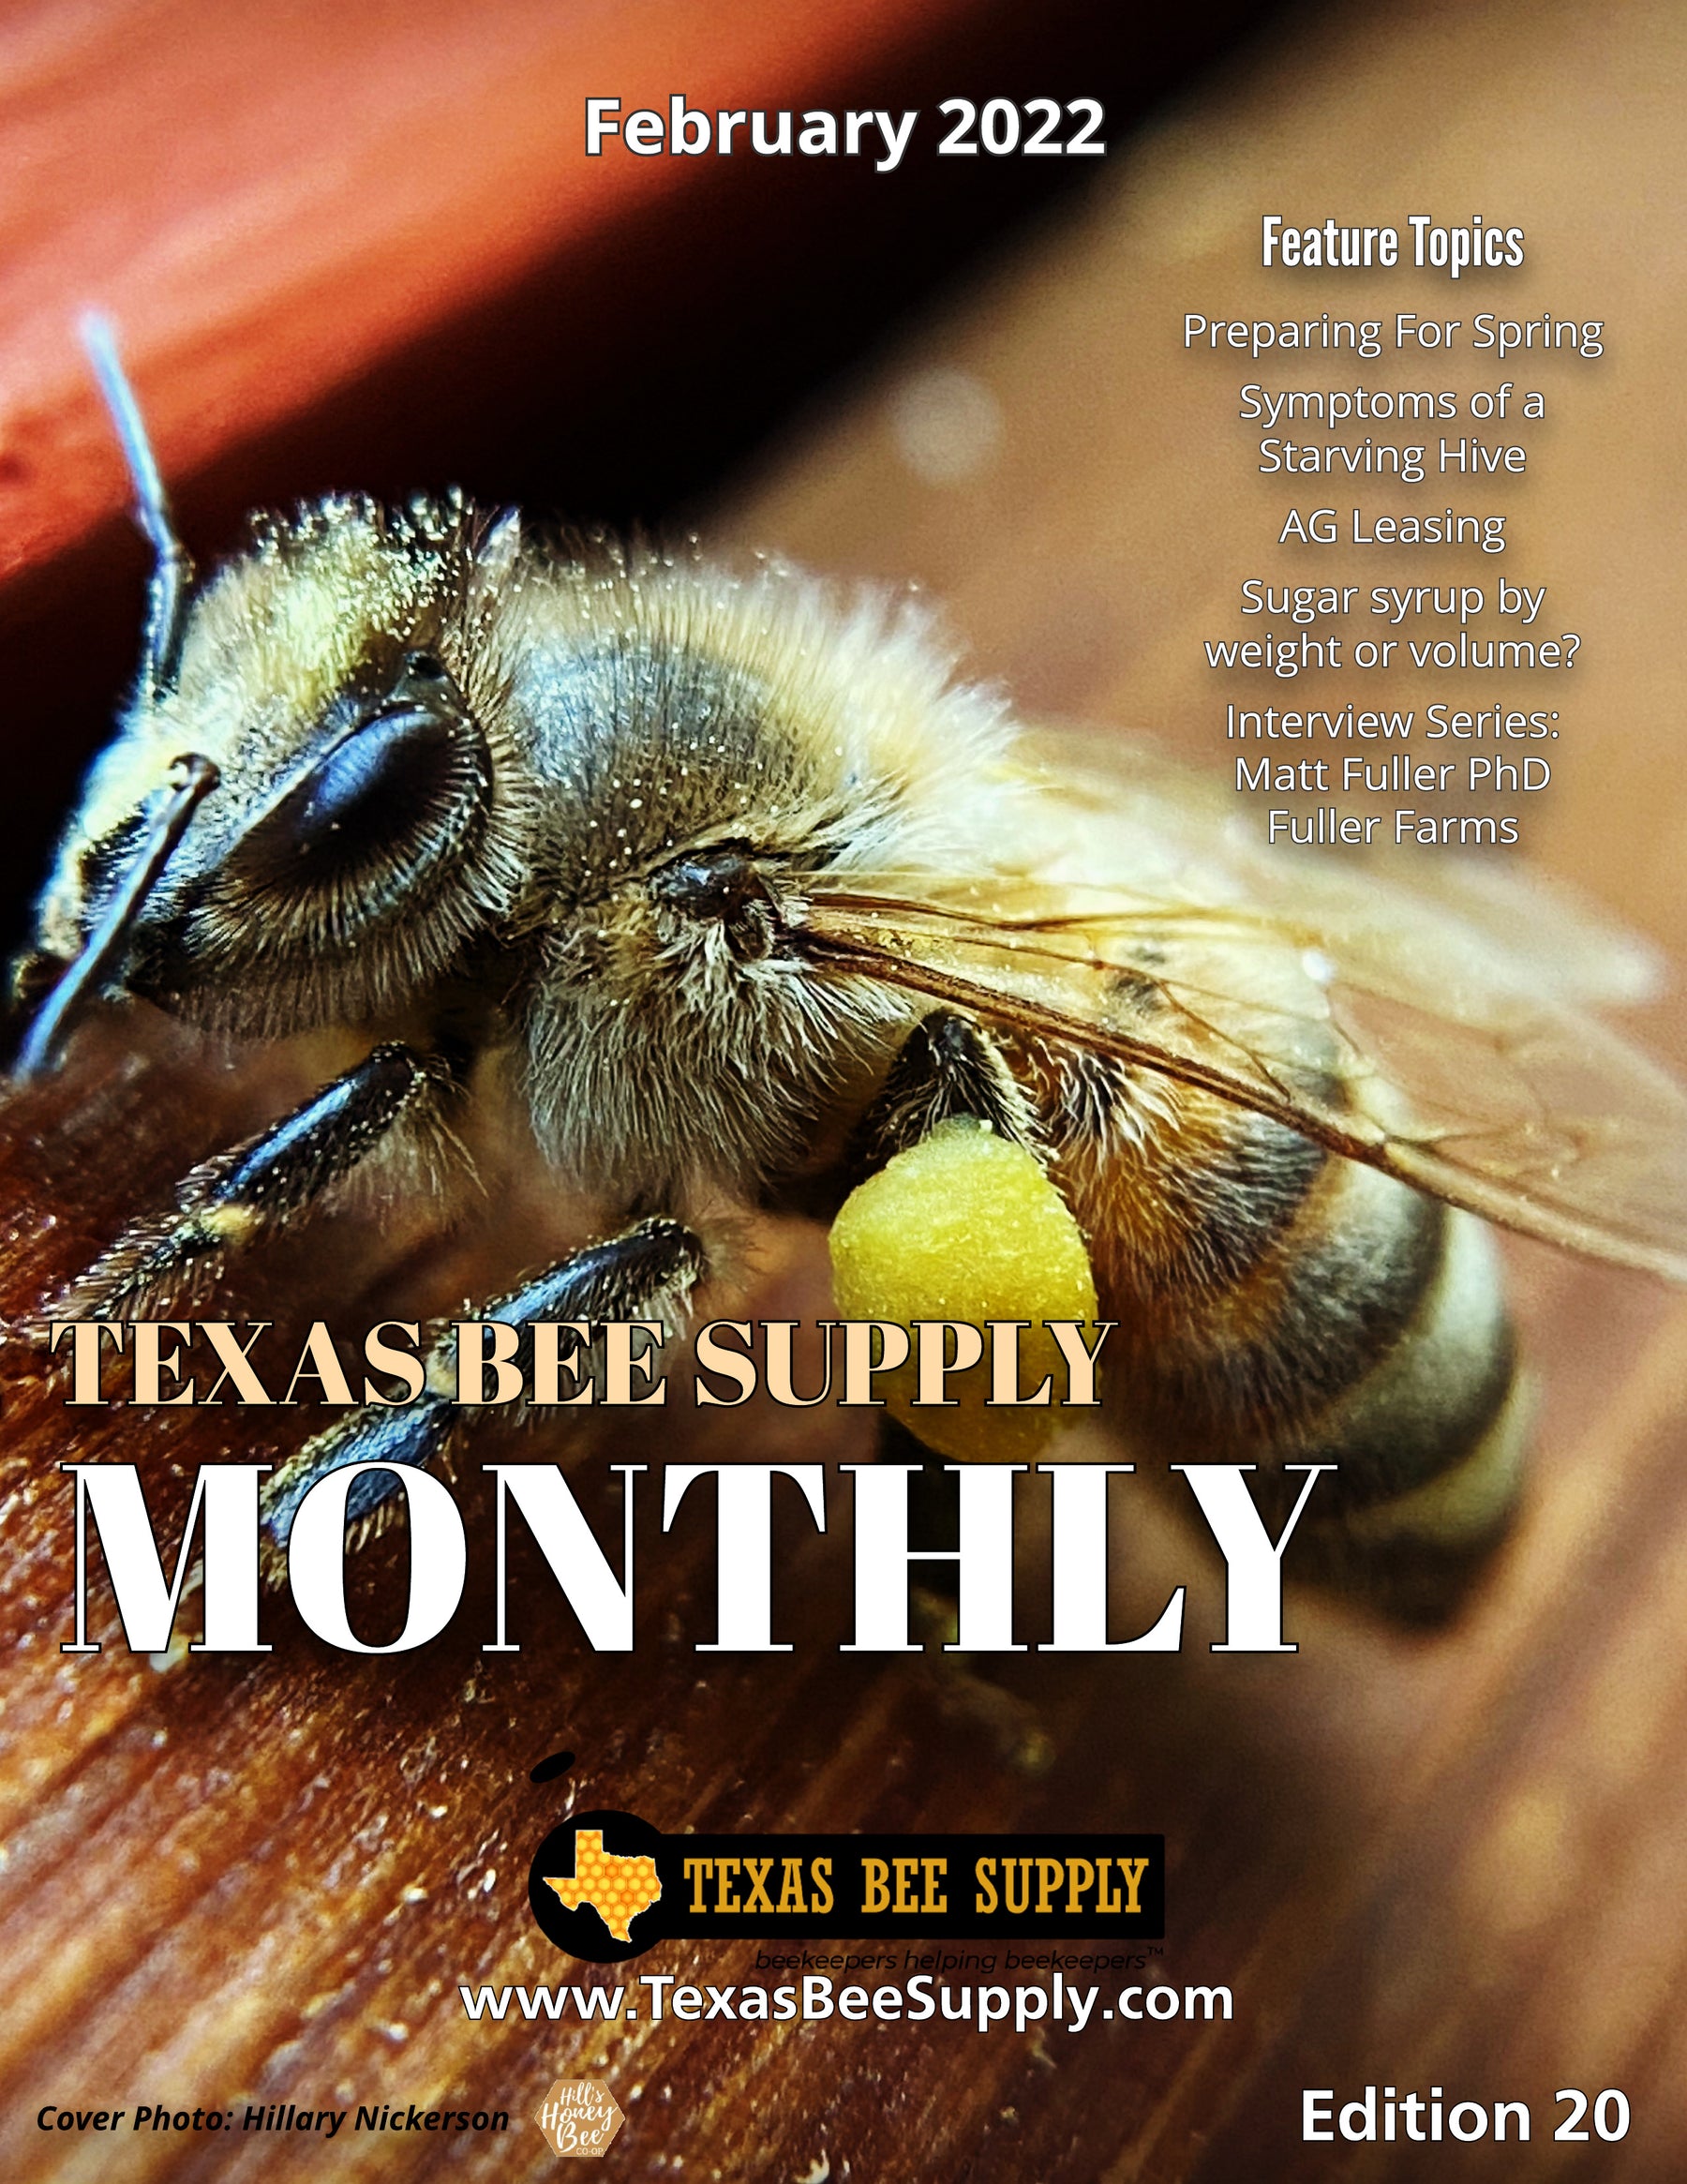 Texas Bee Supply Monthly - February 2022